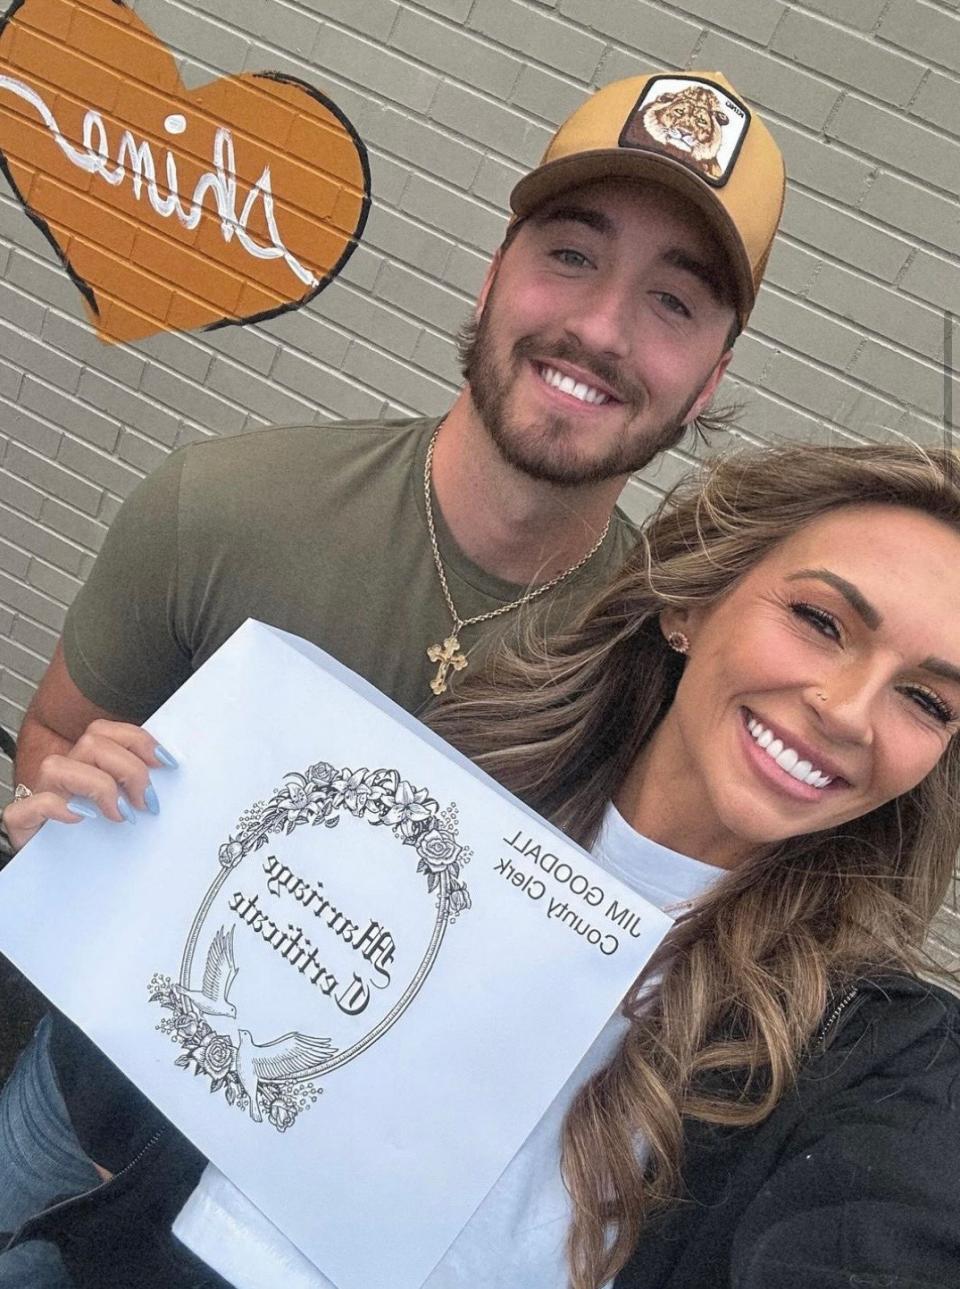 KT Smith marries Luke Scornavacco and shows off marriage certificate